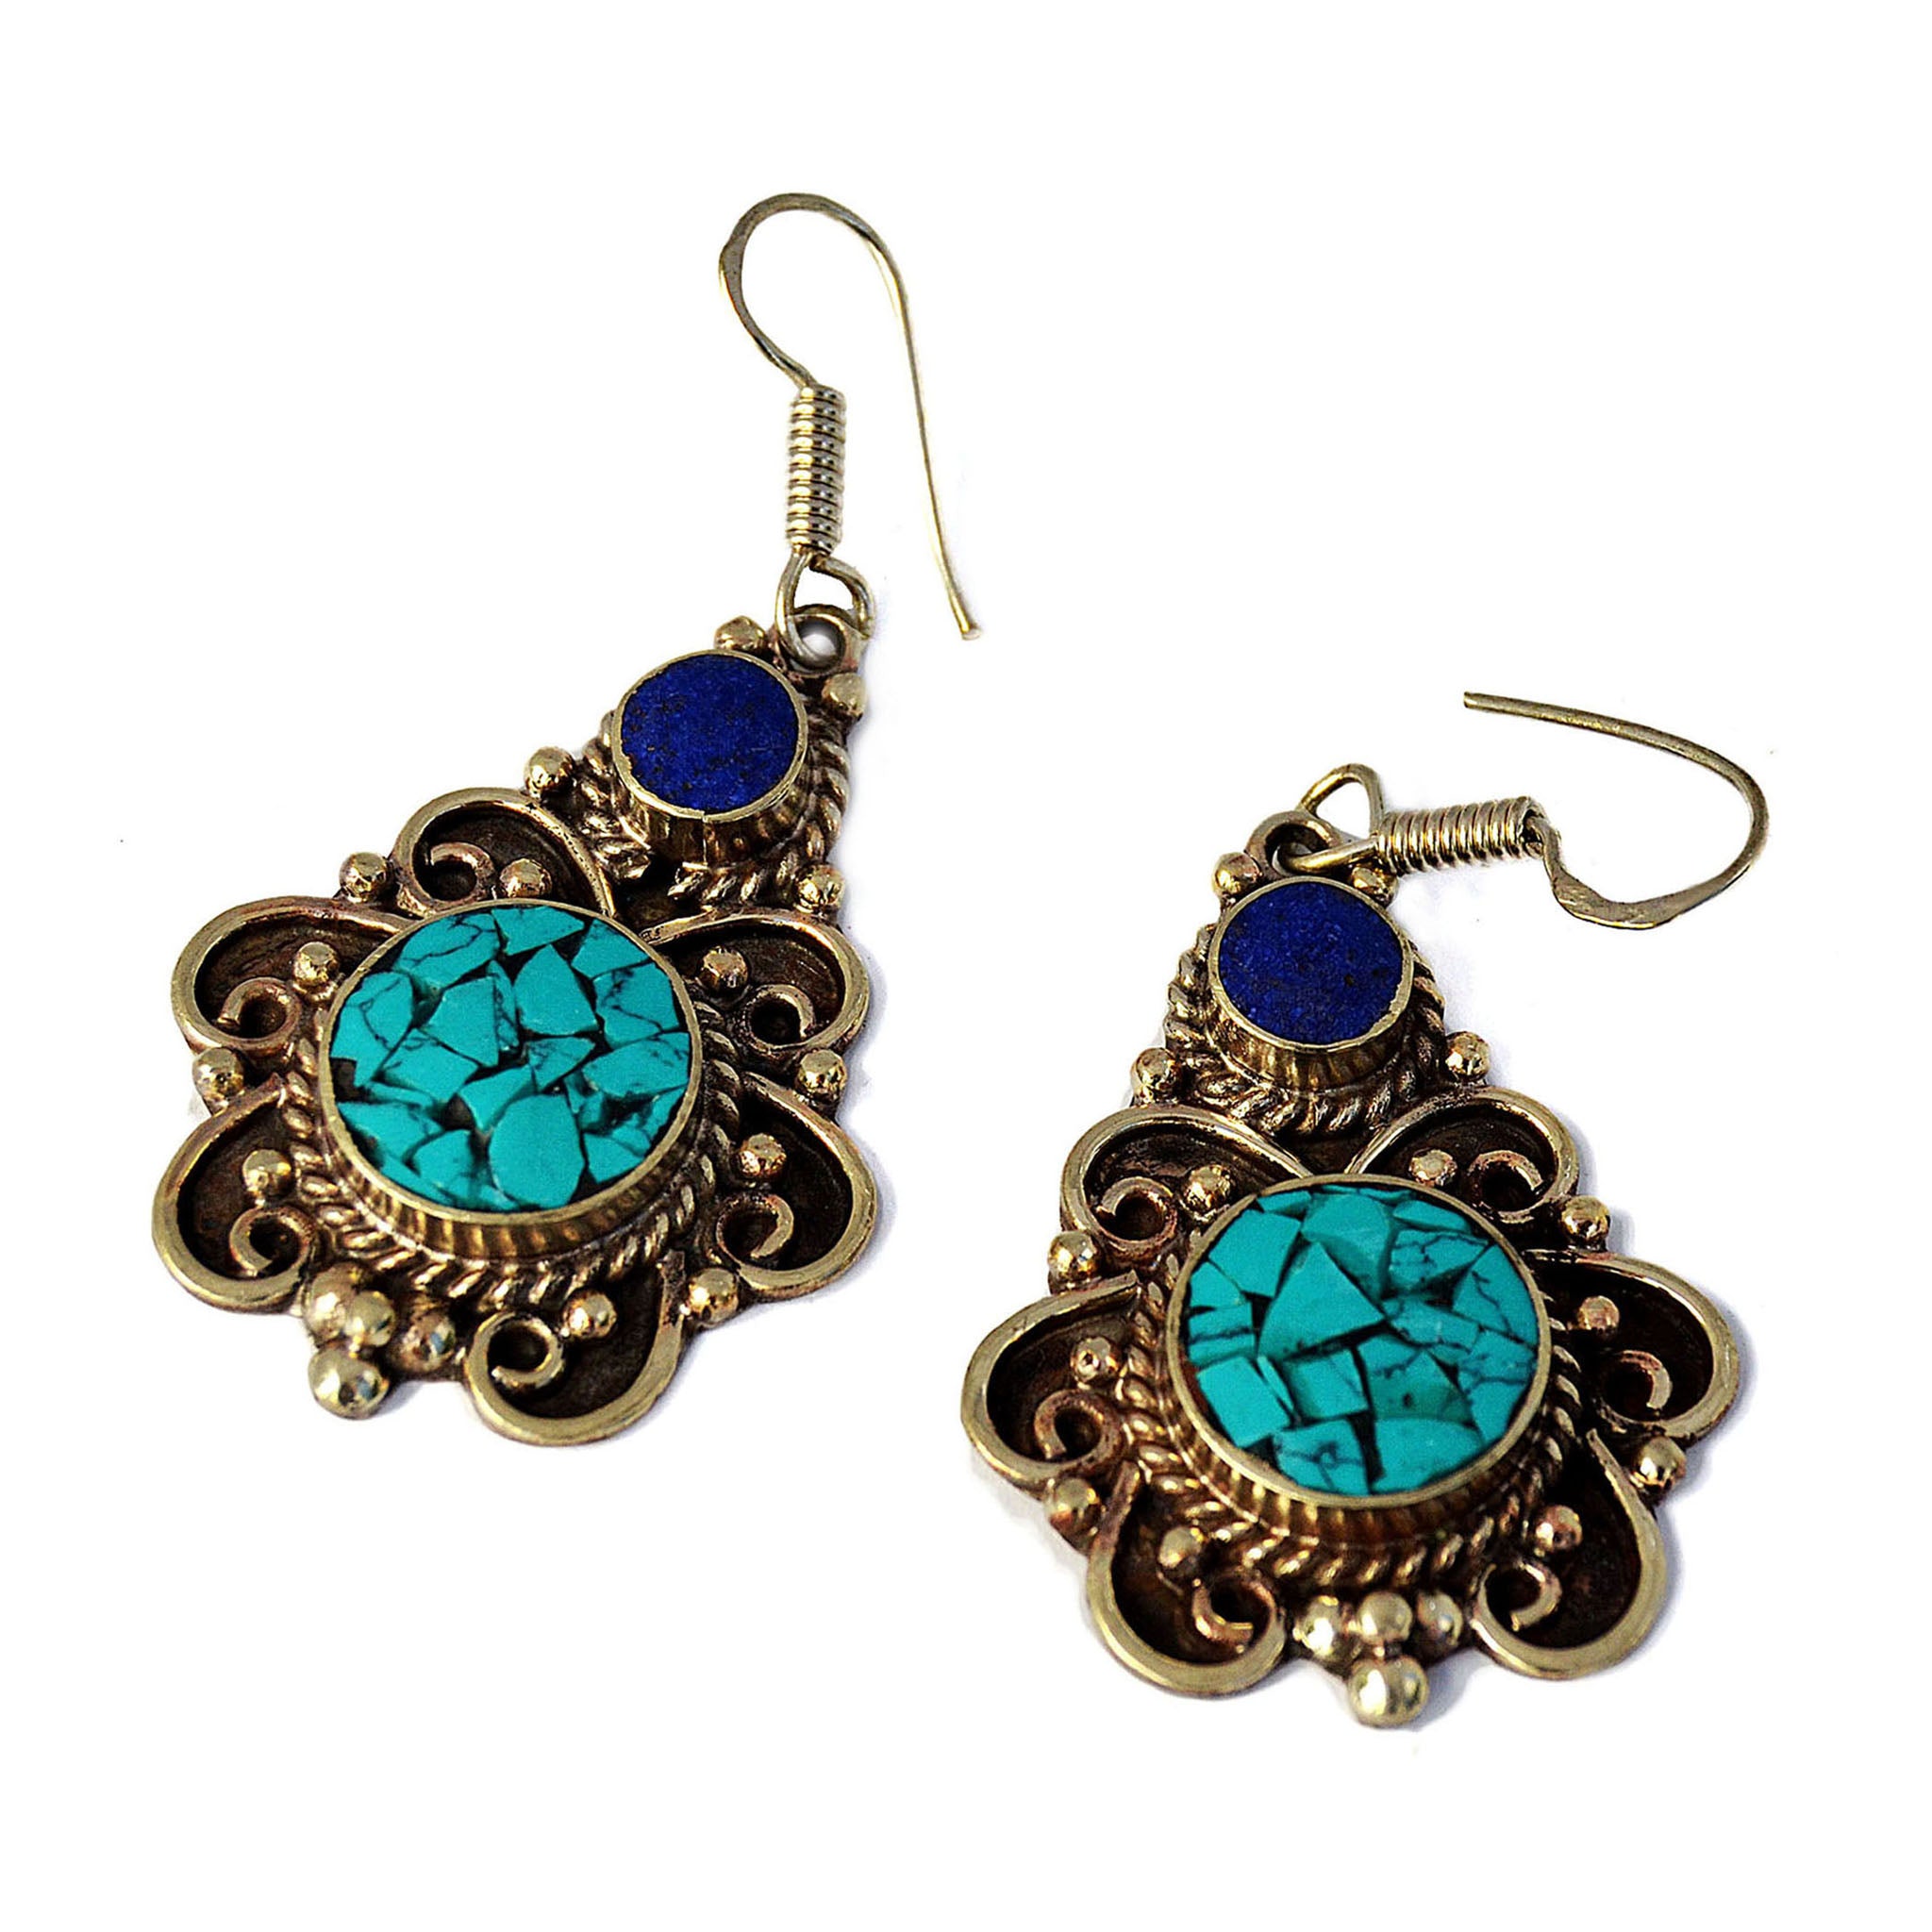 Tibetan silver drop earrings with lapis lazuli and turquoise stones